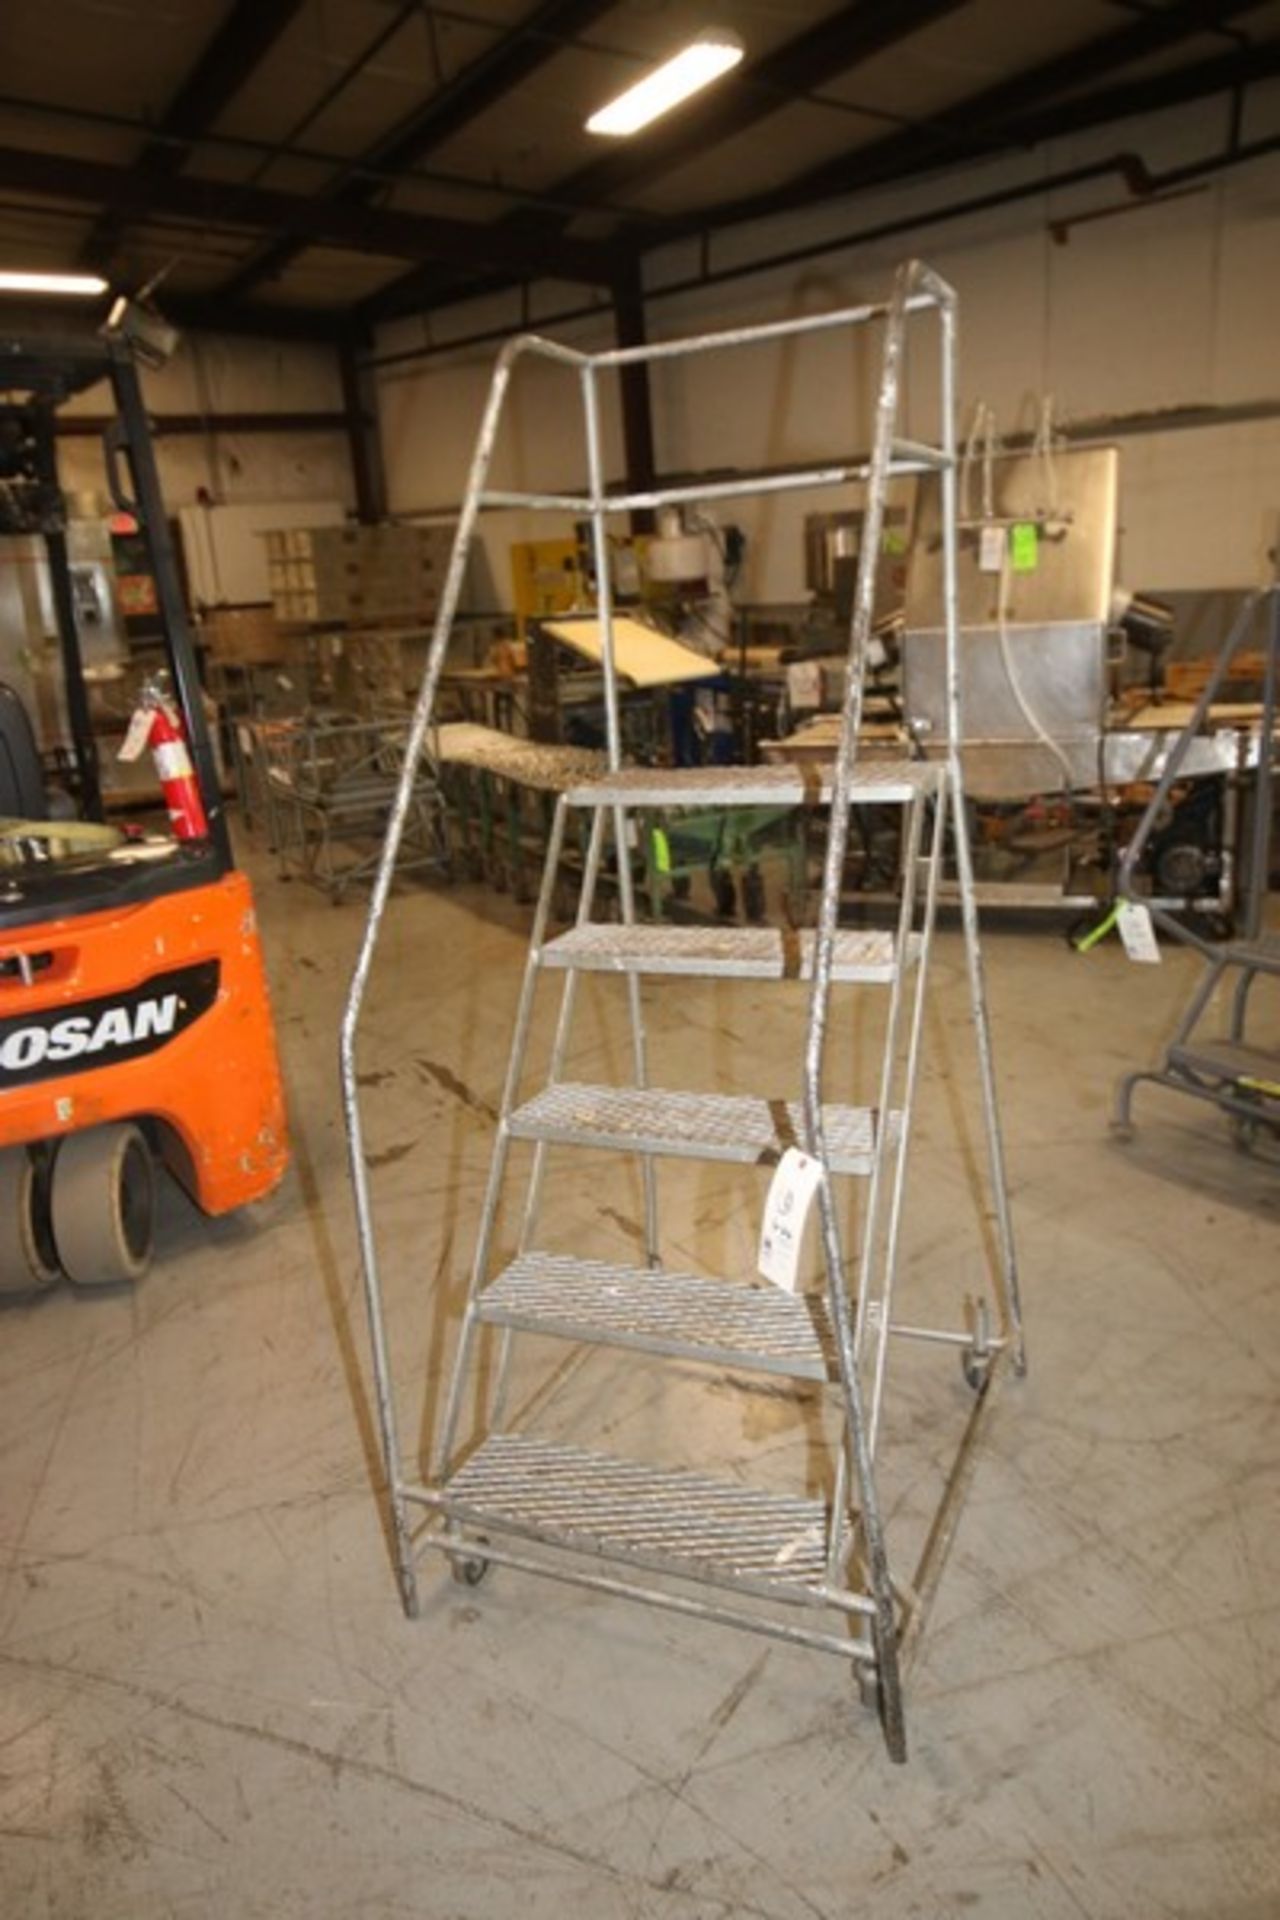 5-Step Portable Stairs, Overall Dims.: Aprox. 35" L x 28" W x 75" Tall, Mounted on Portable Frame